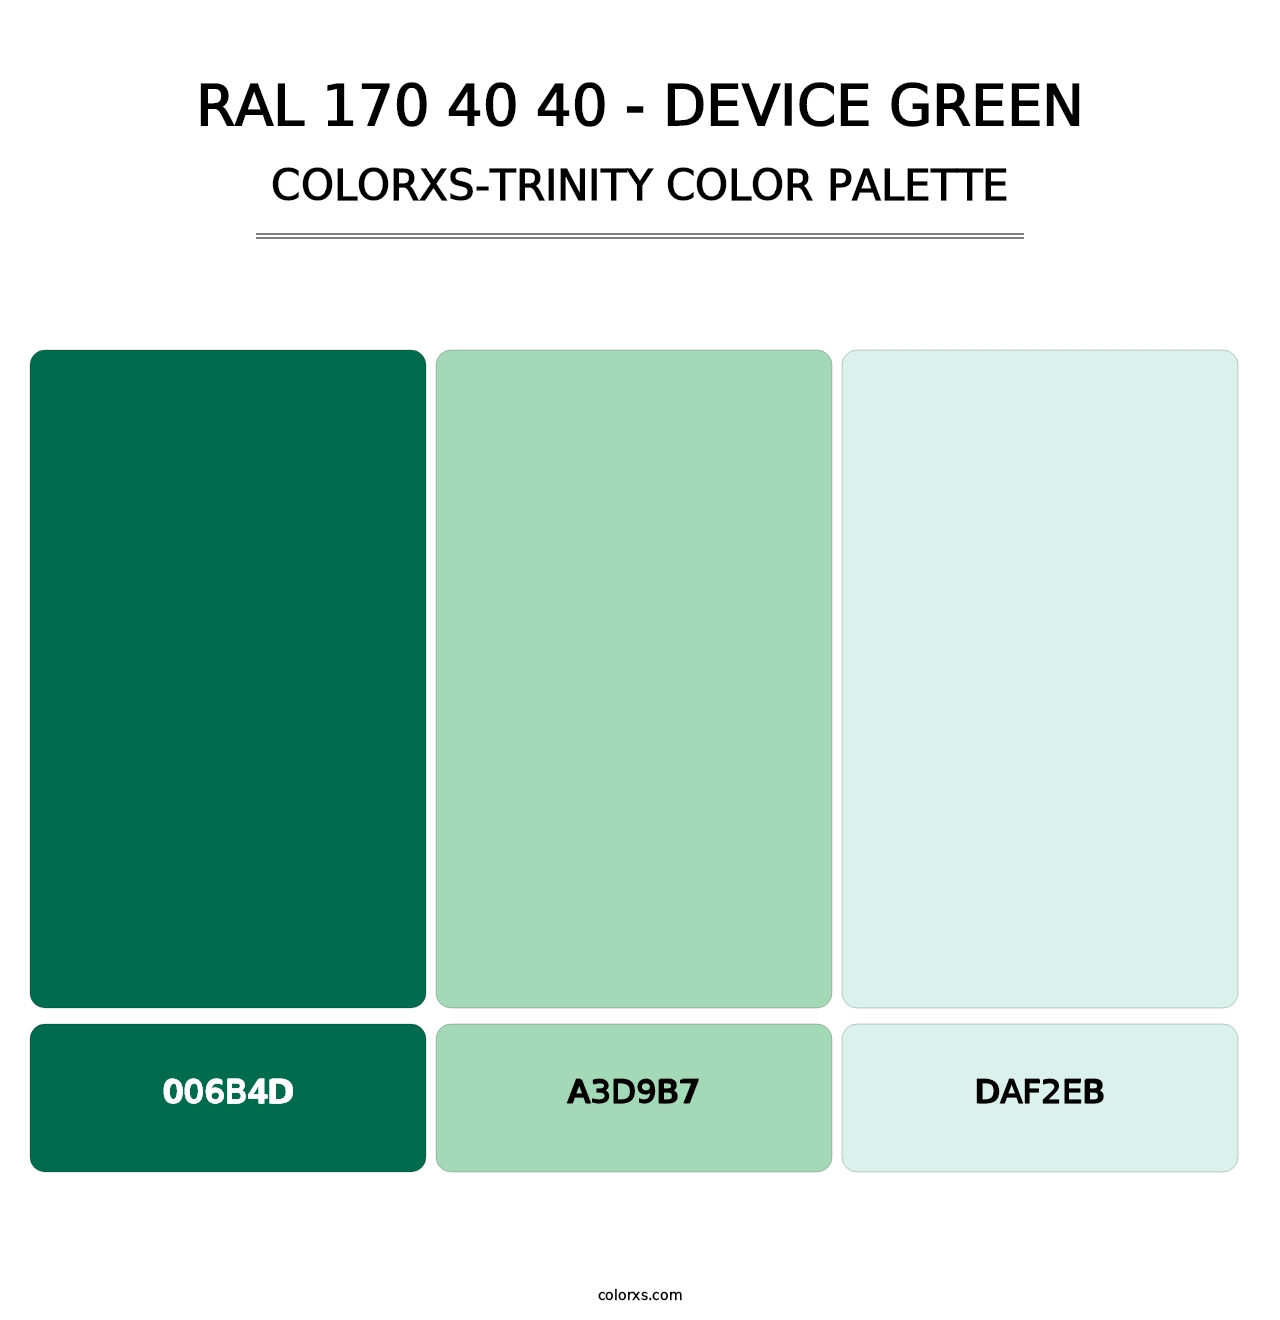 RAL 170 40 40 - Device Green - Colorxs Trinity Palette